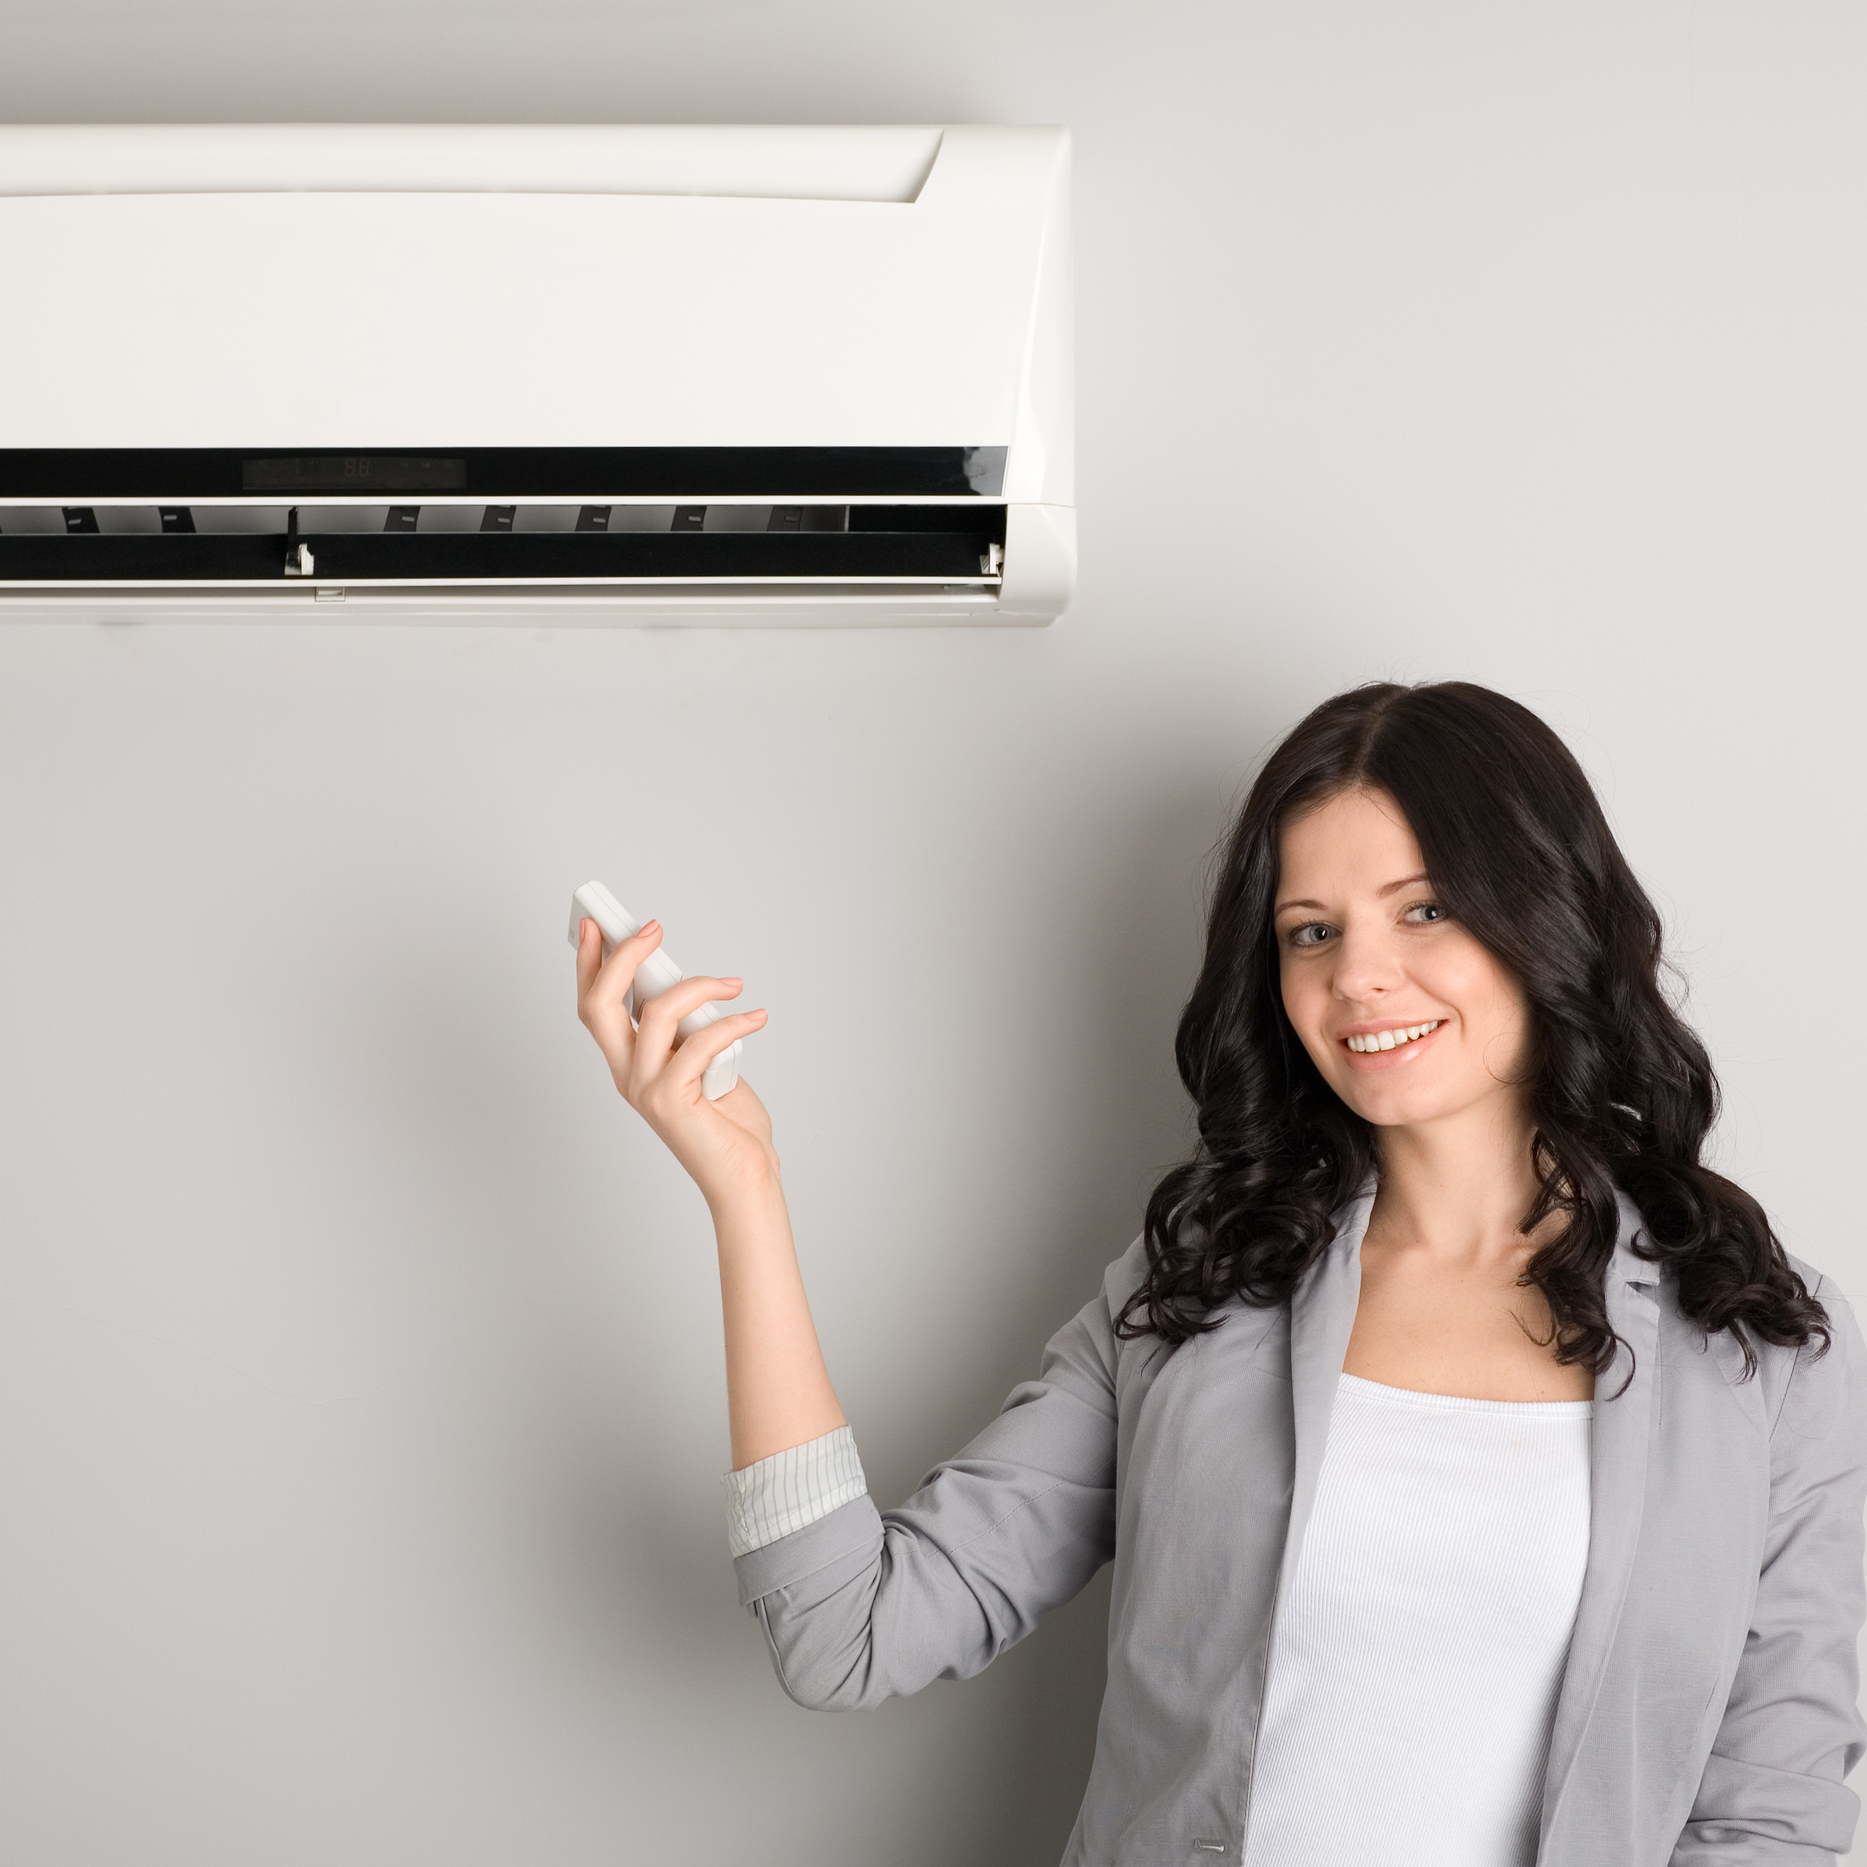 We specialize in Ductless AC to keep your home comfortable in St George UT.